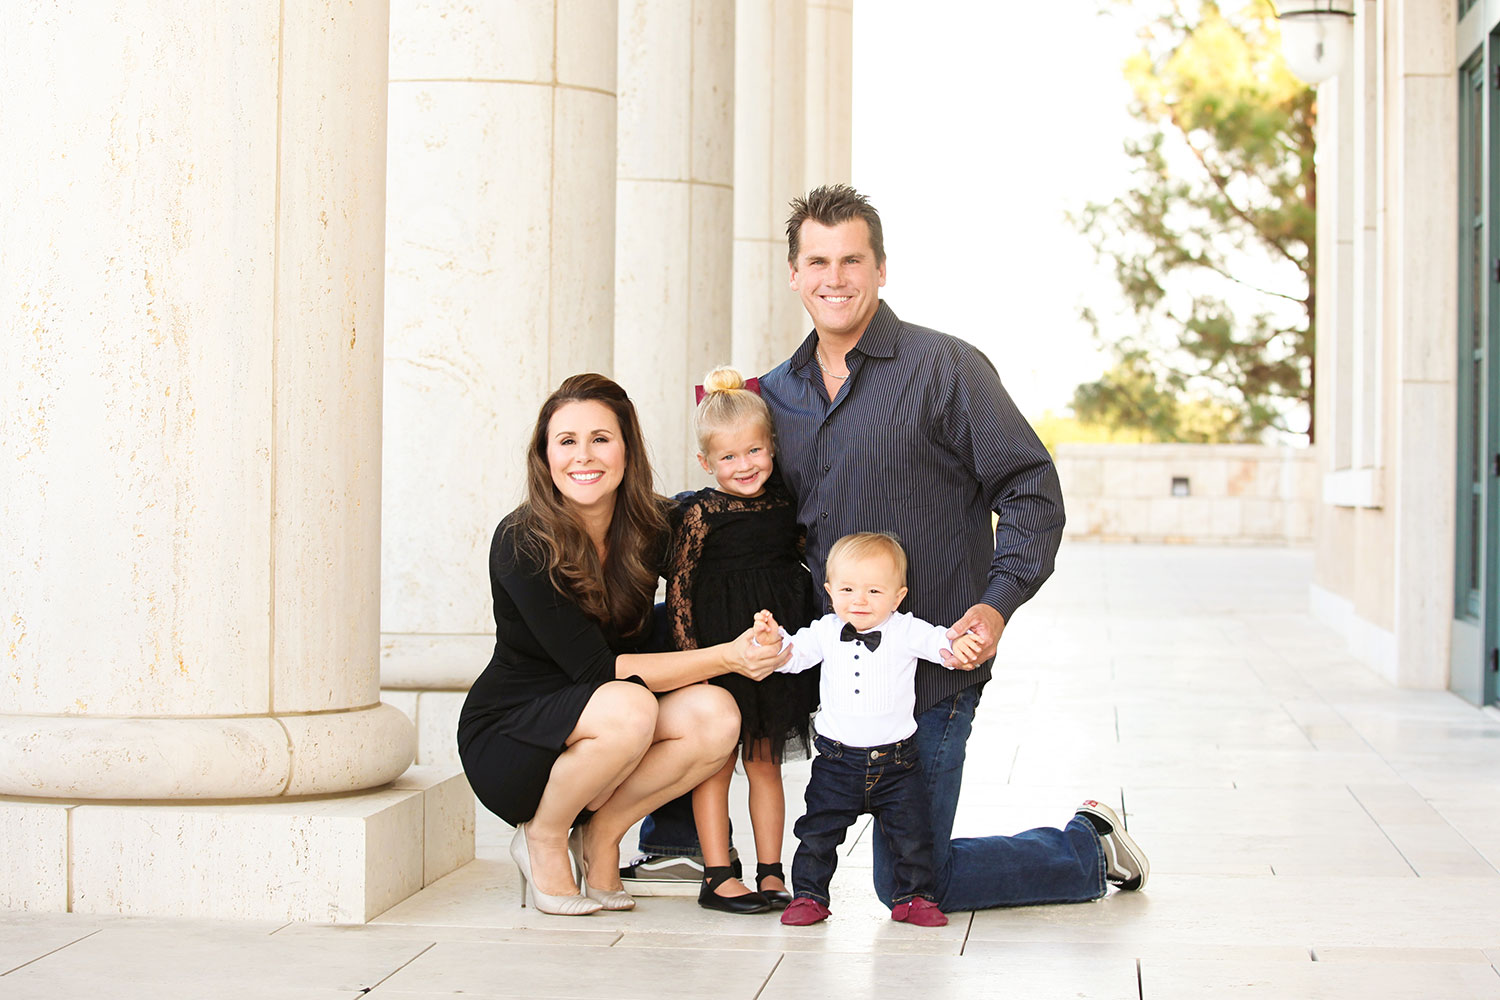 los angeles family photography photographer portraits the best near me 517